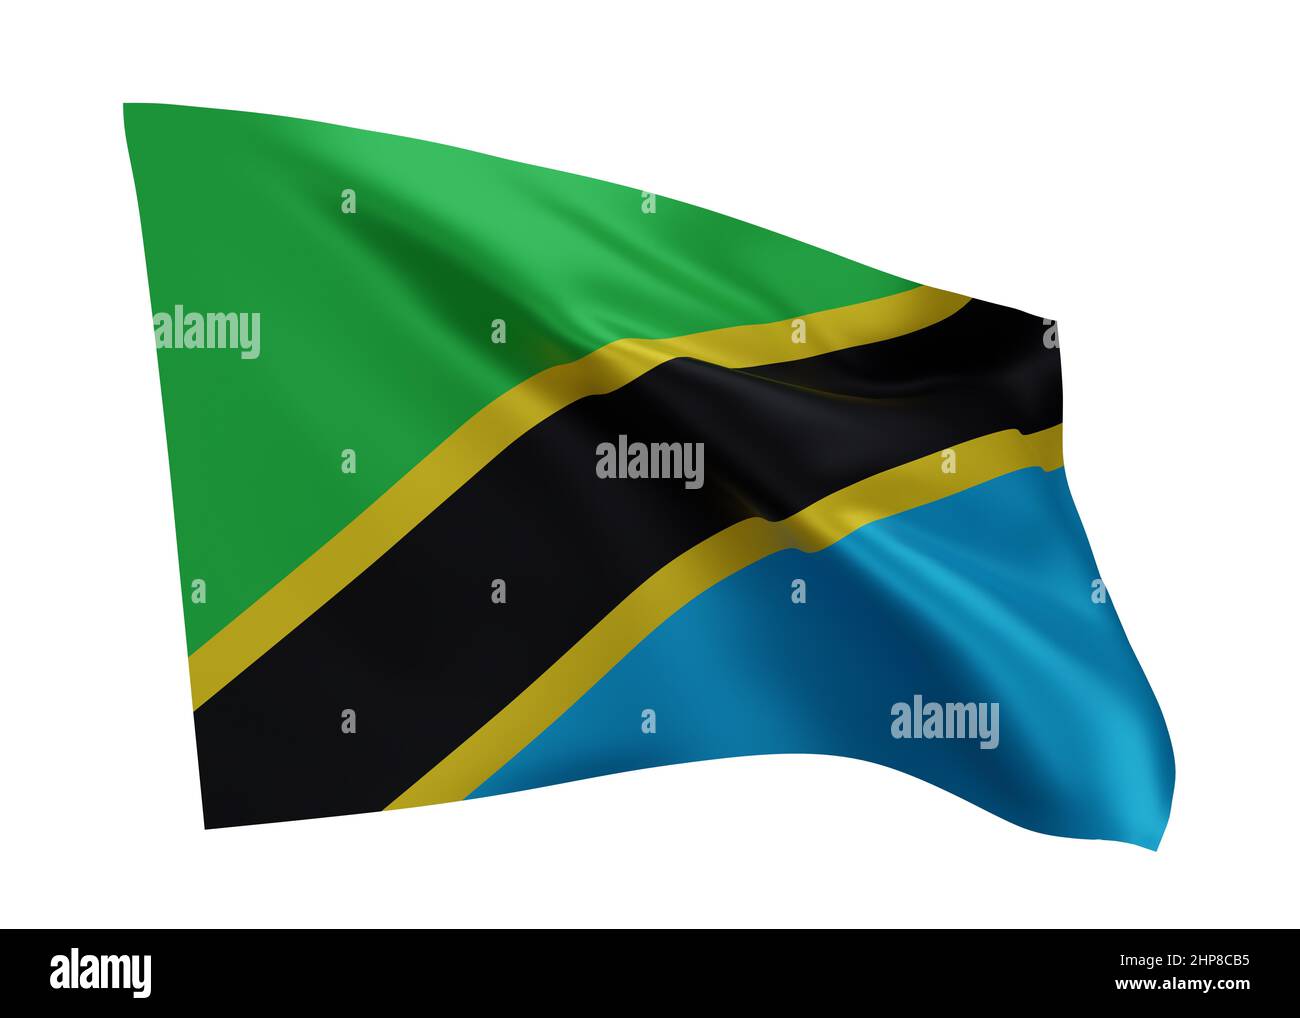 3d illustration flag of Tanzania. Tanzanian high resolution flag isolated against white background. 3d rendering Stock Photo